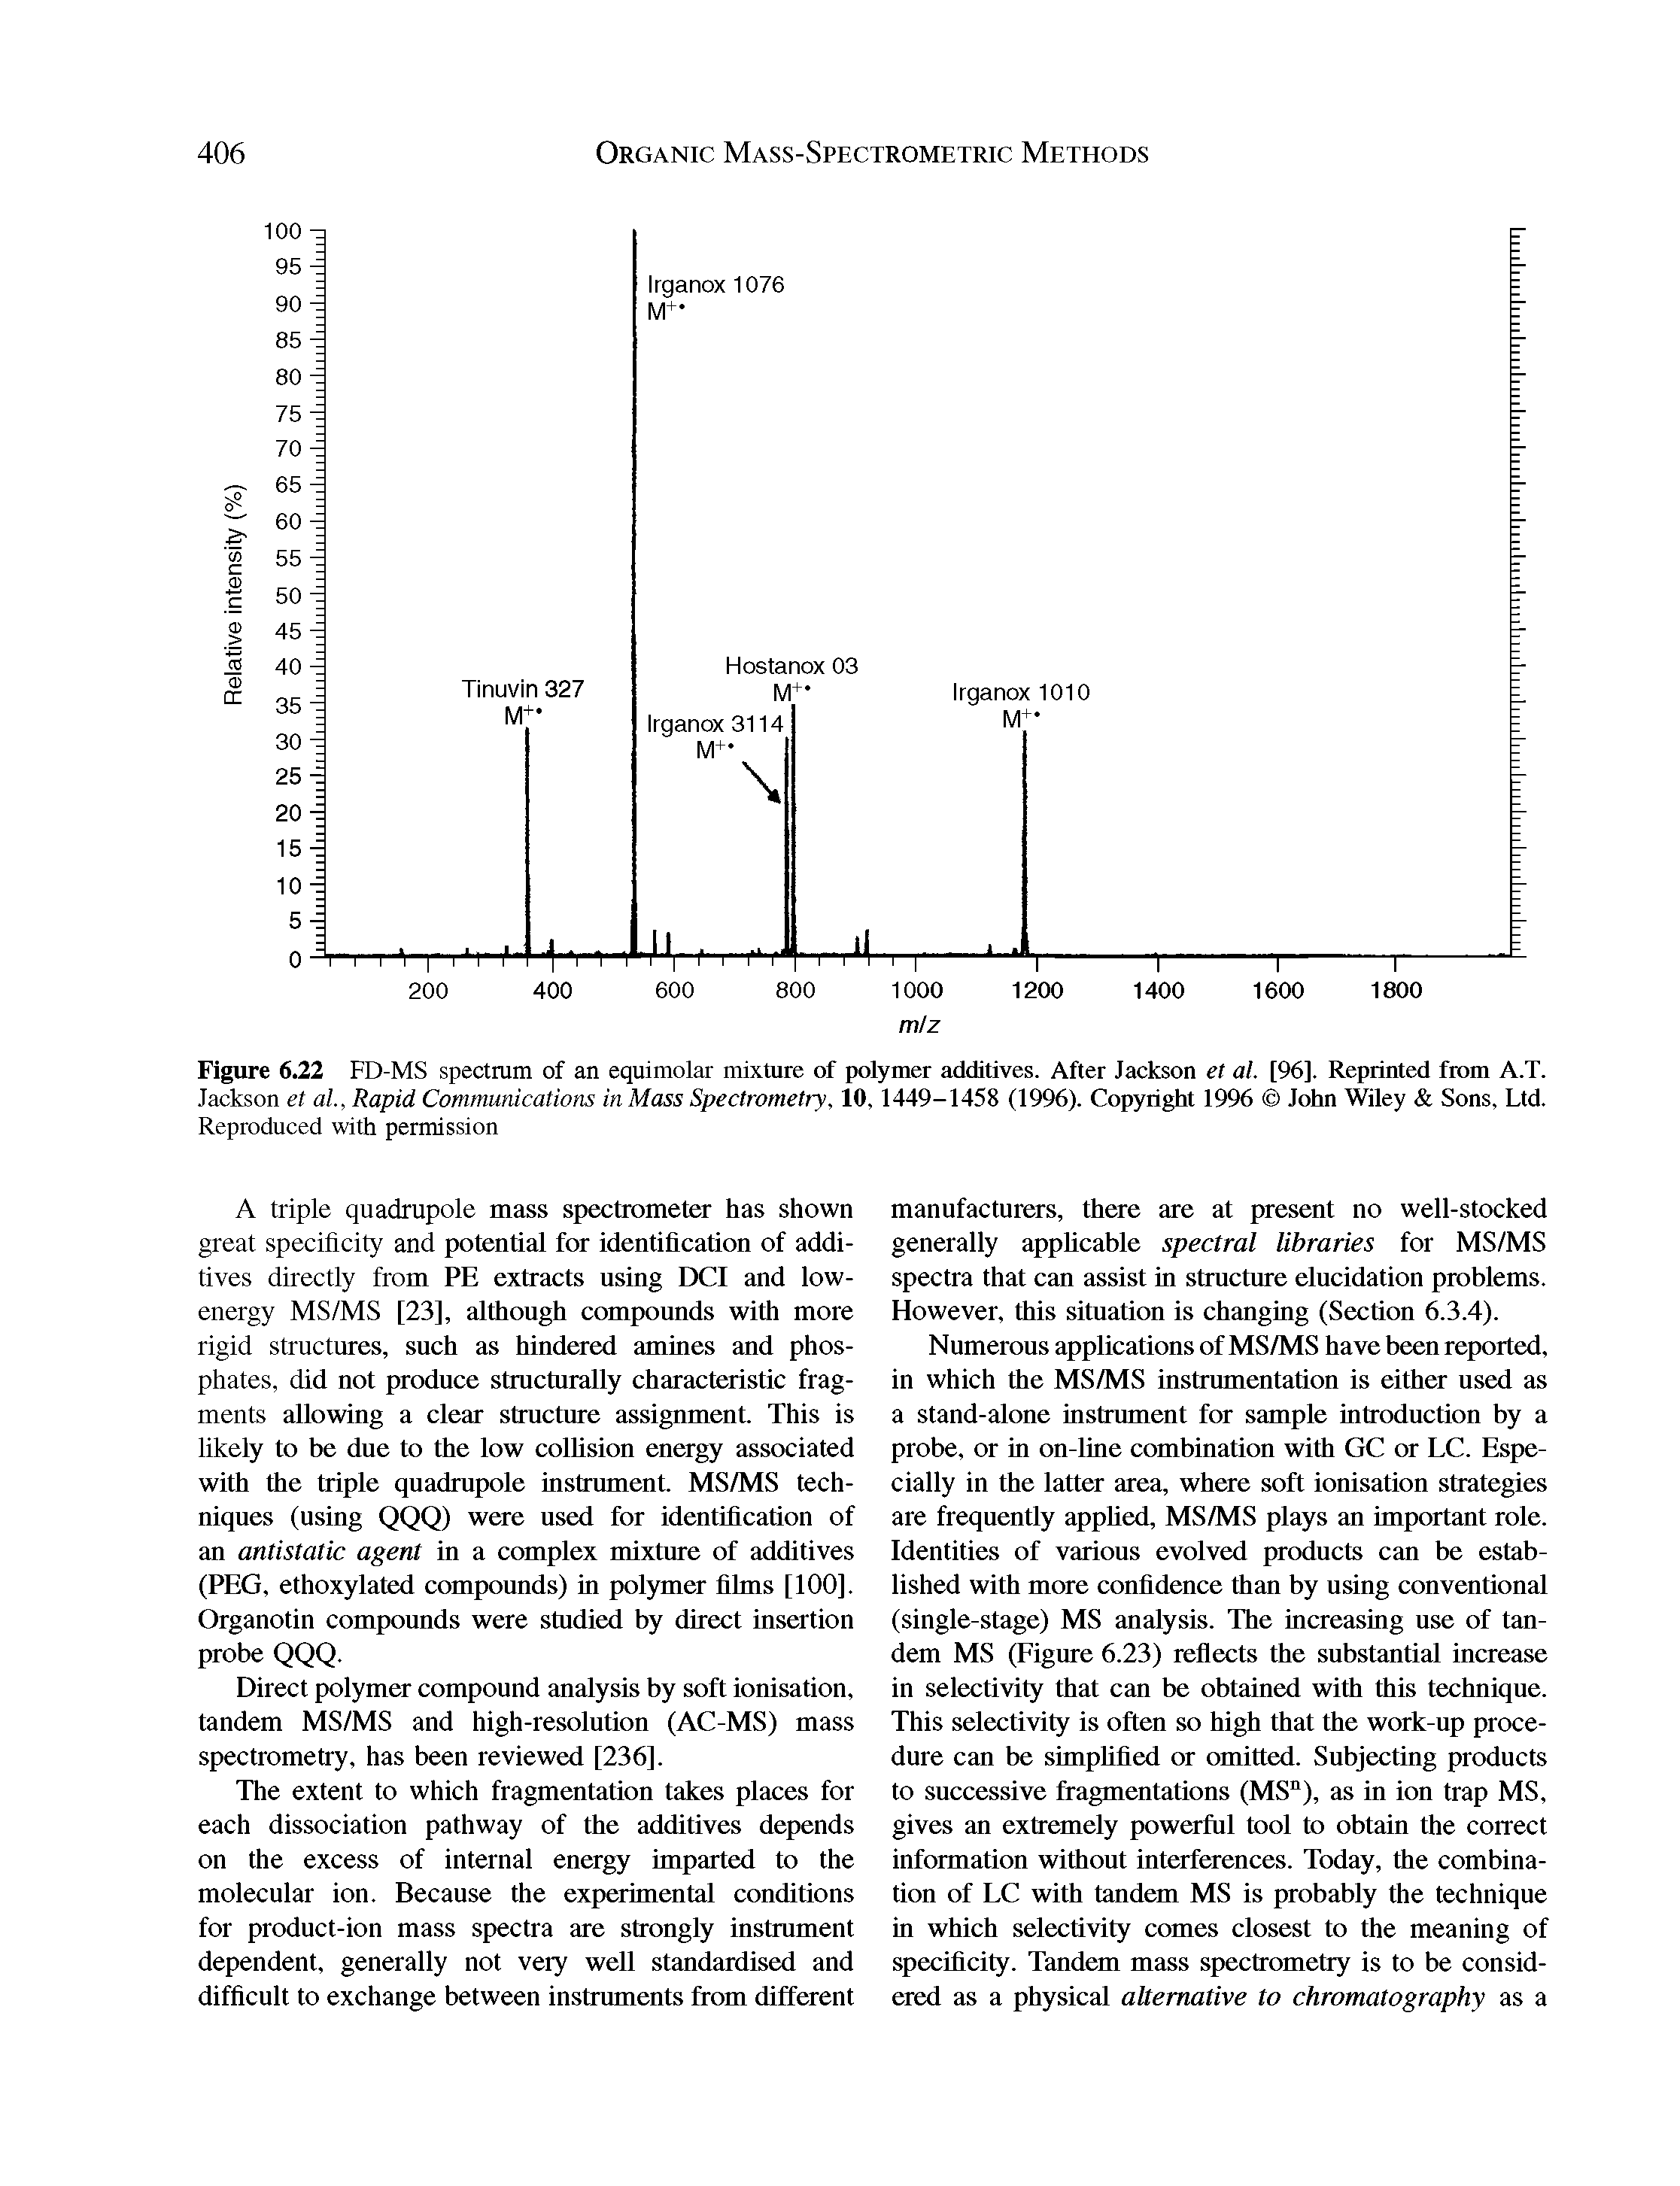 Figure 6.22 FD-MS spectrum of an equimolar mixture of polymer additives. After Jackson et al. [96]. Reprinted from A.T. Jackson et al., Rapid Communications in Mass Spectrometry, 10,1449-1458 (1996). Copyright 1996 John Wiley Sons, Ltd. Reproduced with permission...